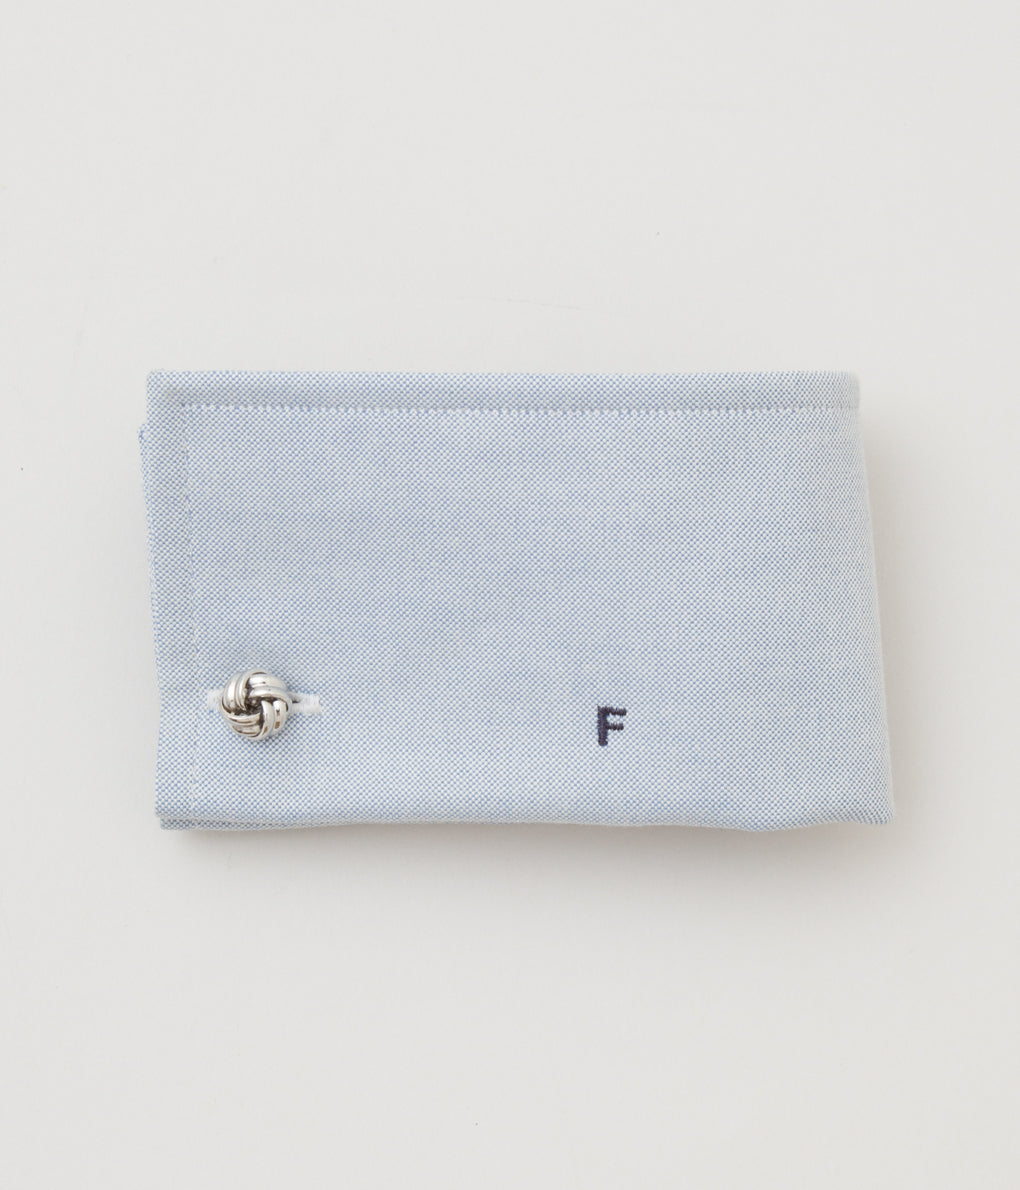 FINE AND DANDY "CUFF LINKS KNOT" (SILVER)